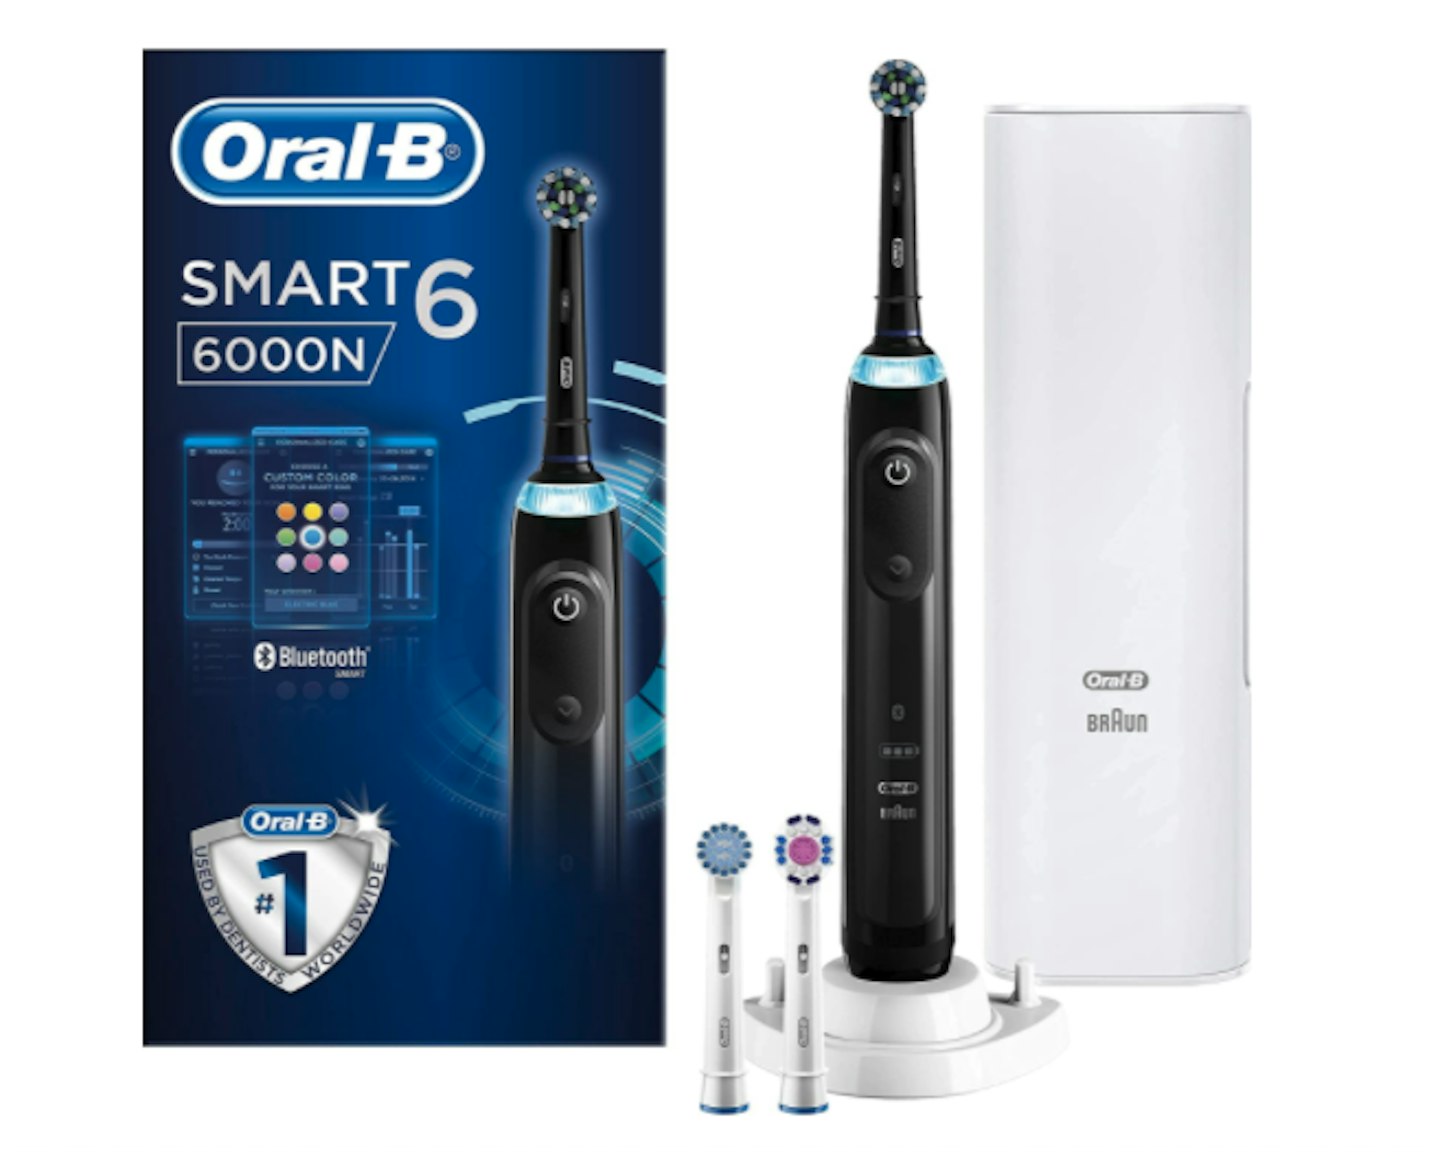 Oral-B Smart 6 Electric Toothbrush